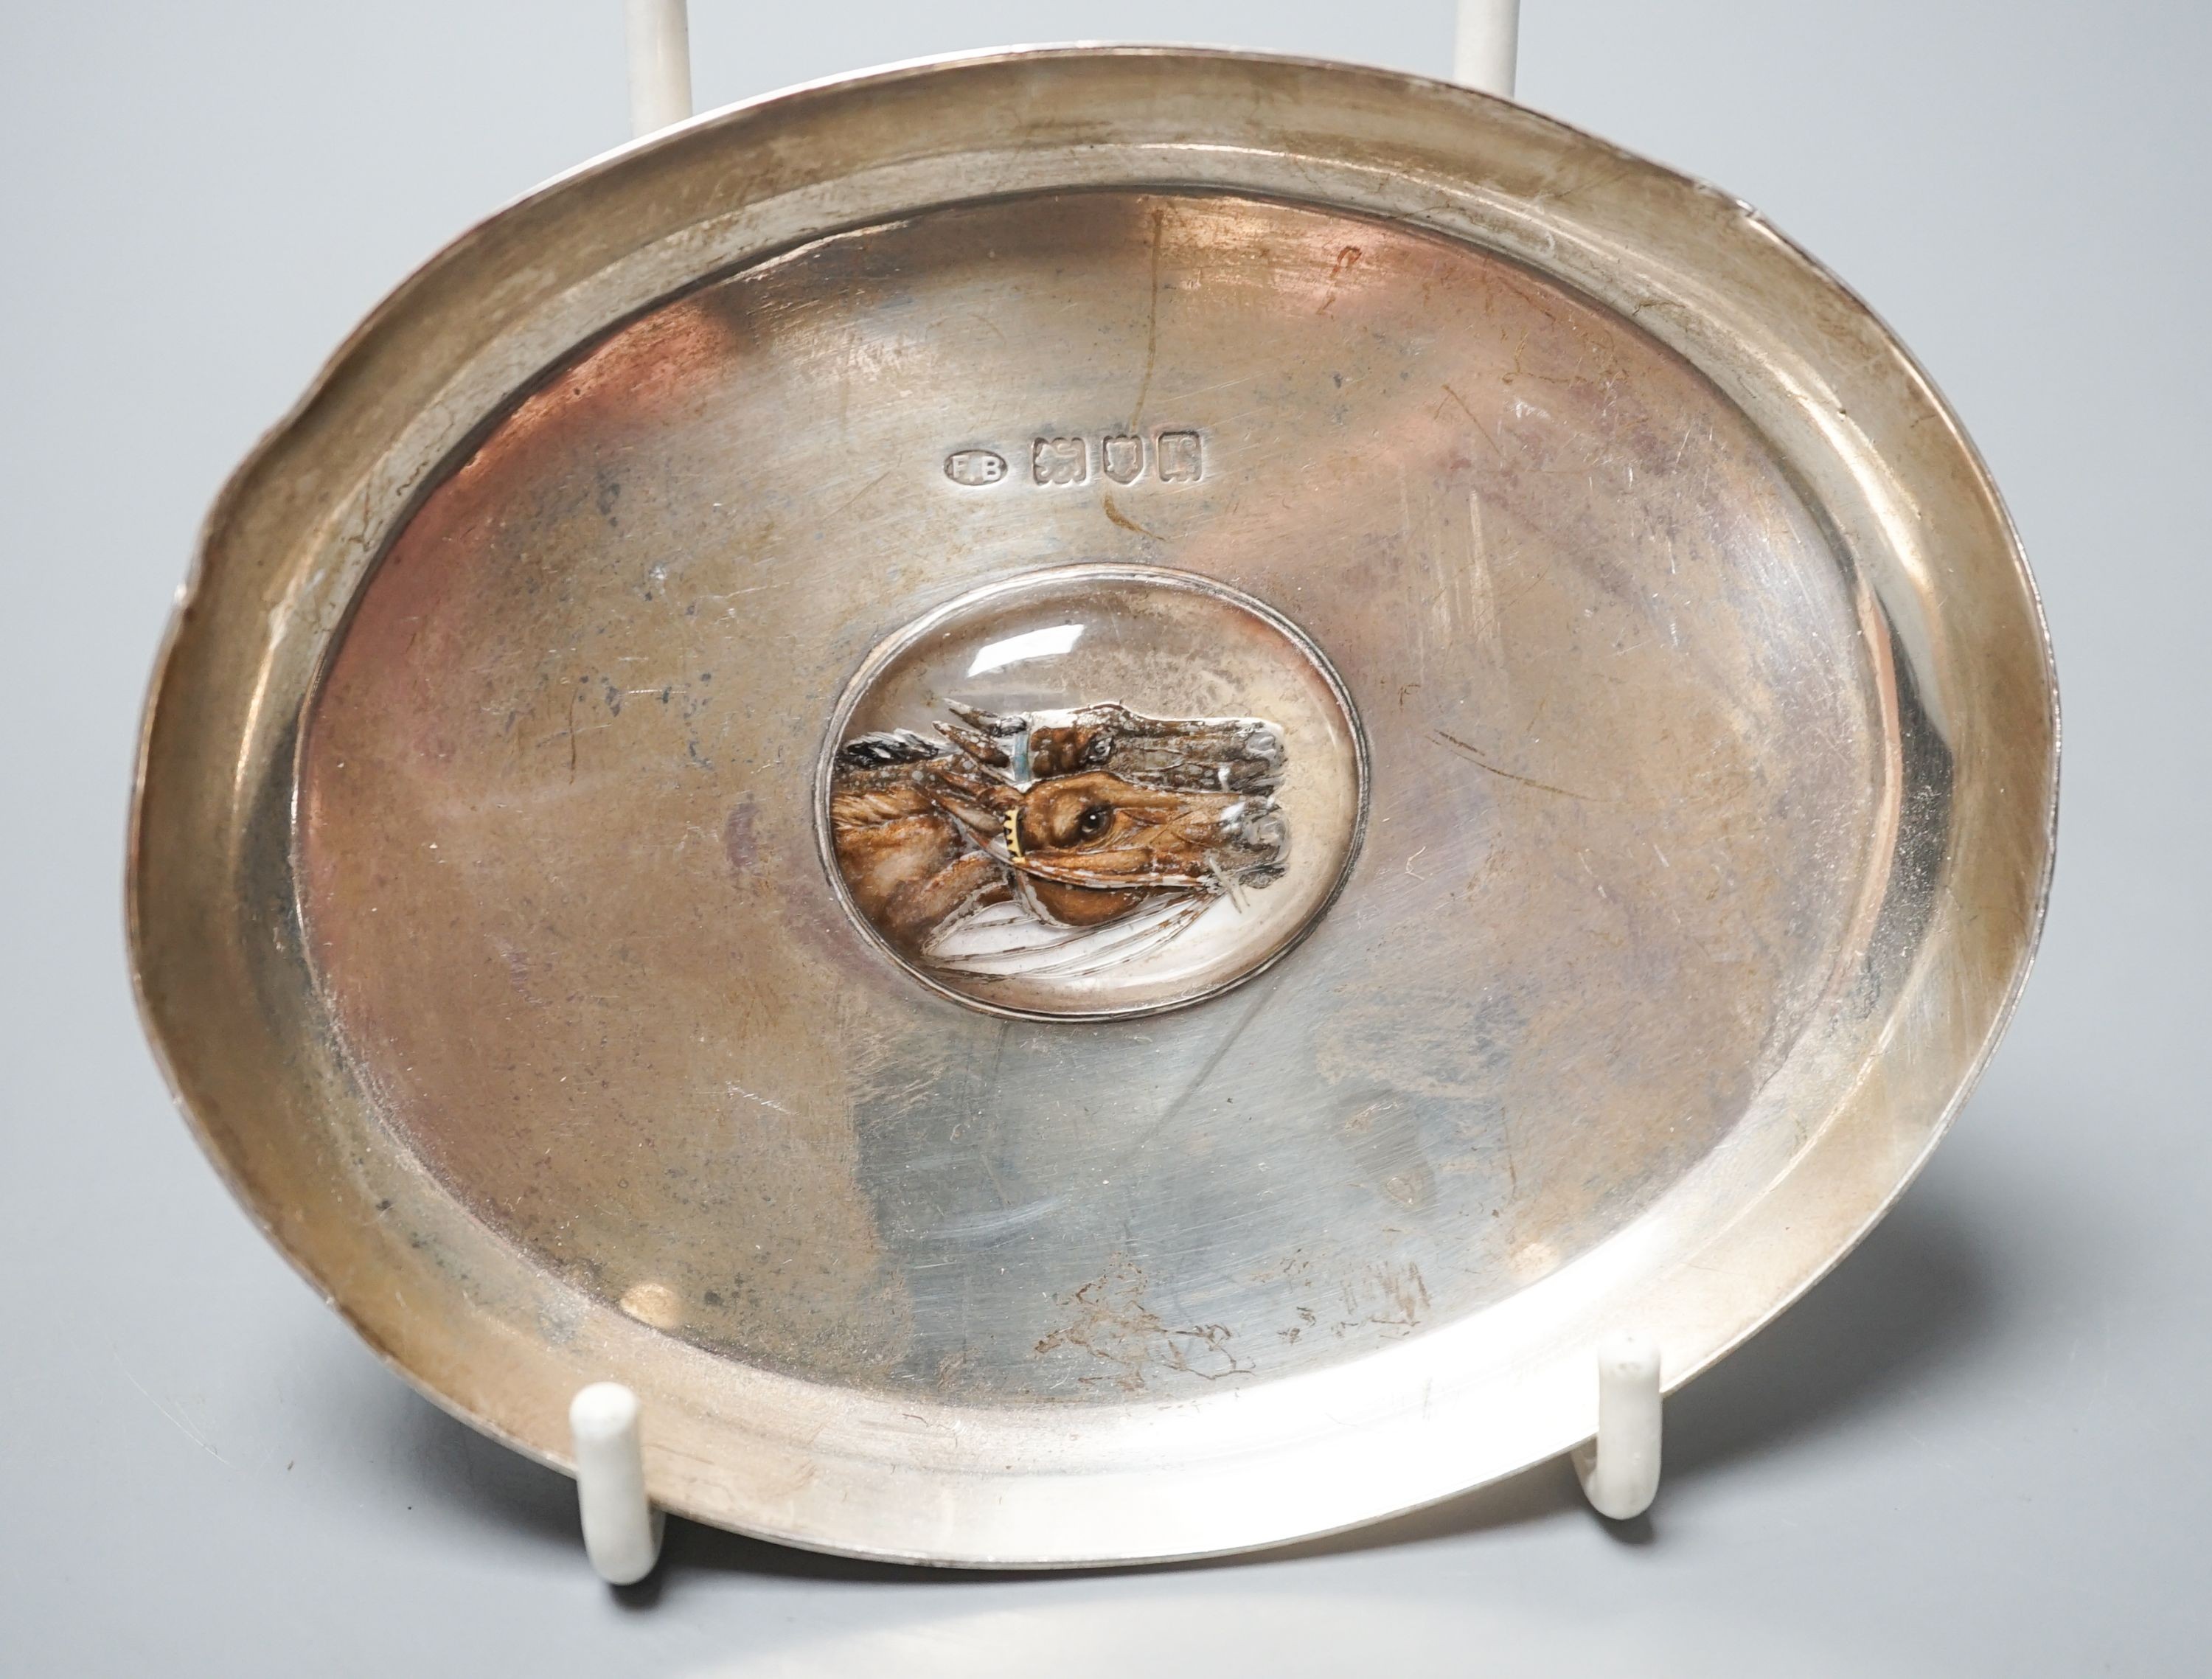 A George V silver oval dish with inset Essex crystal depicting two horse's heads, Frederick Thomas Buckthorpe, London, 1912, 11.4cm.